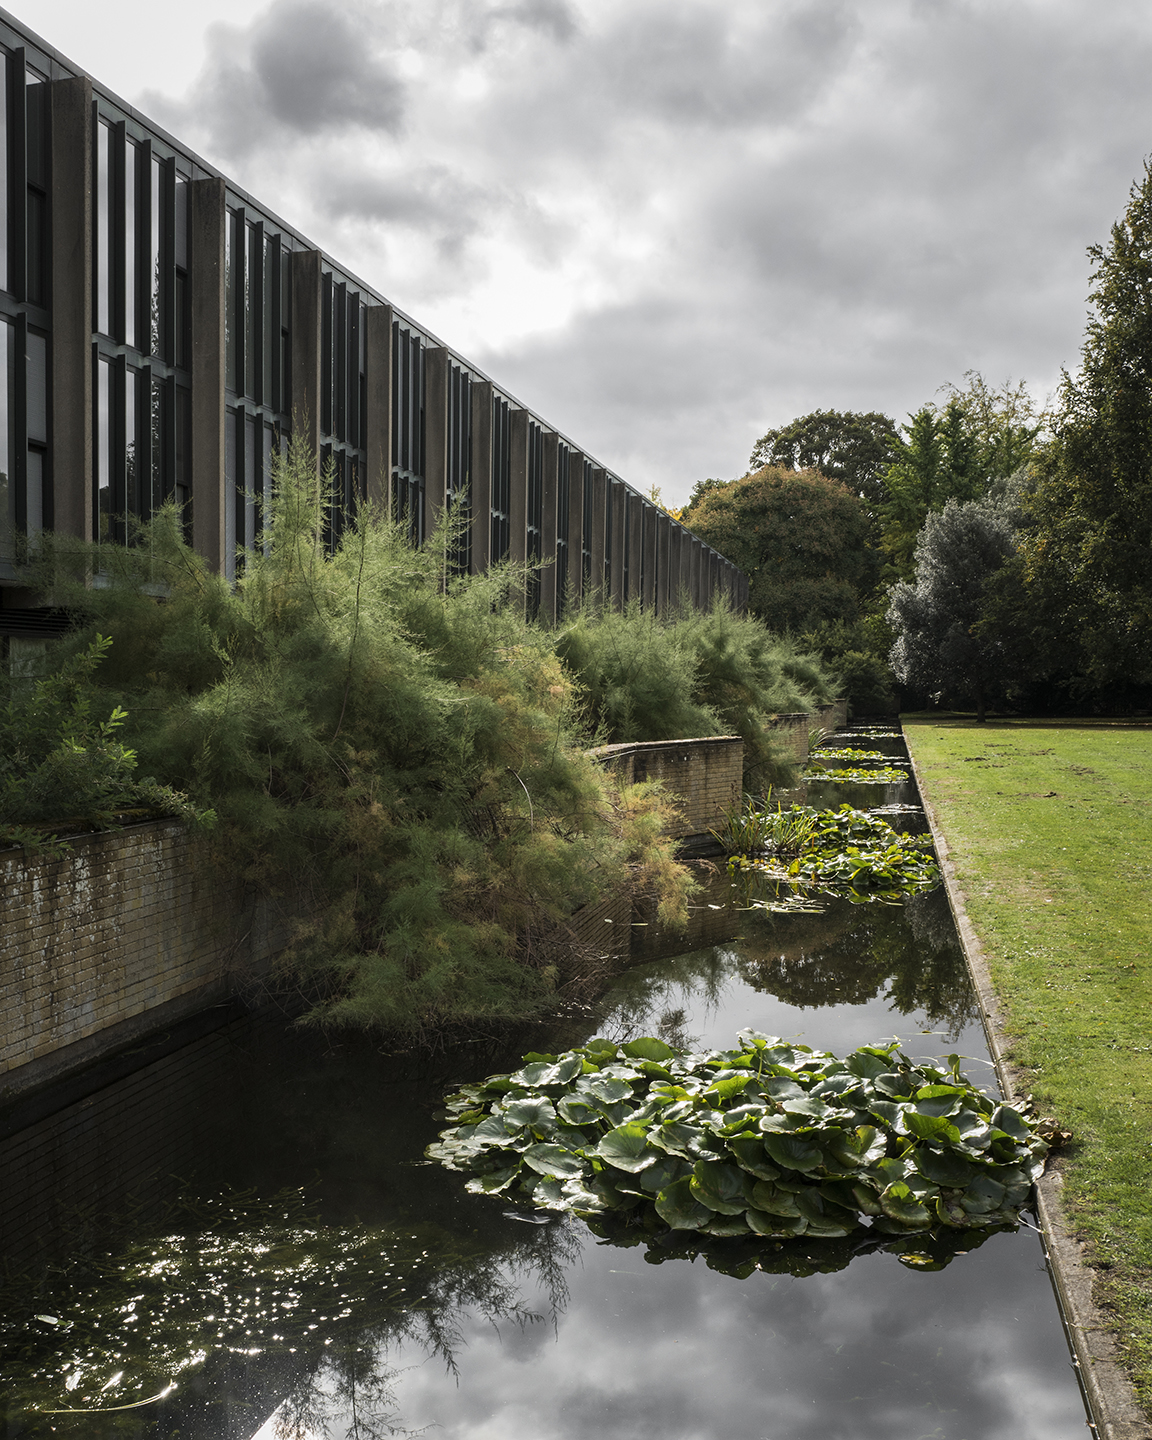 The gardens at St. Catherine's College, Oxford. Photo: Jonas Bjerre Poulsen / Norm Architects.